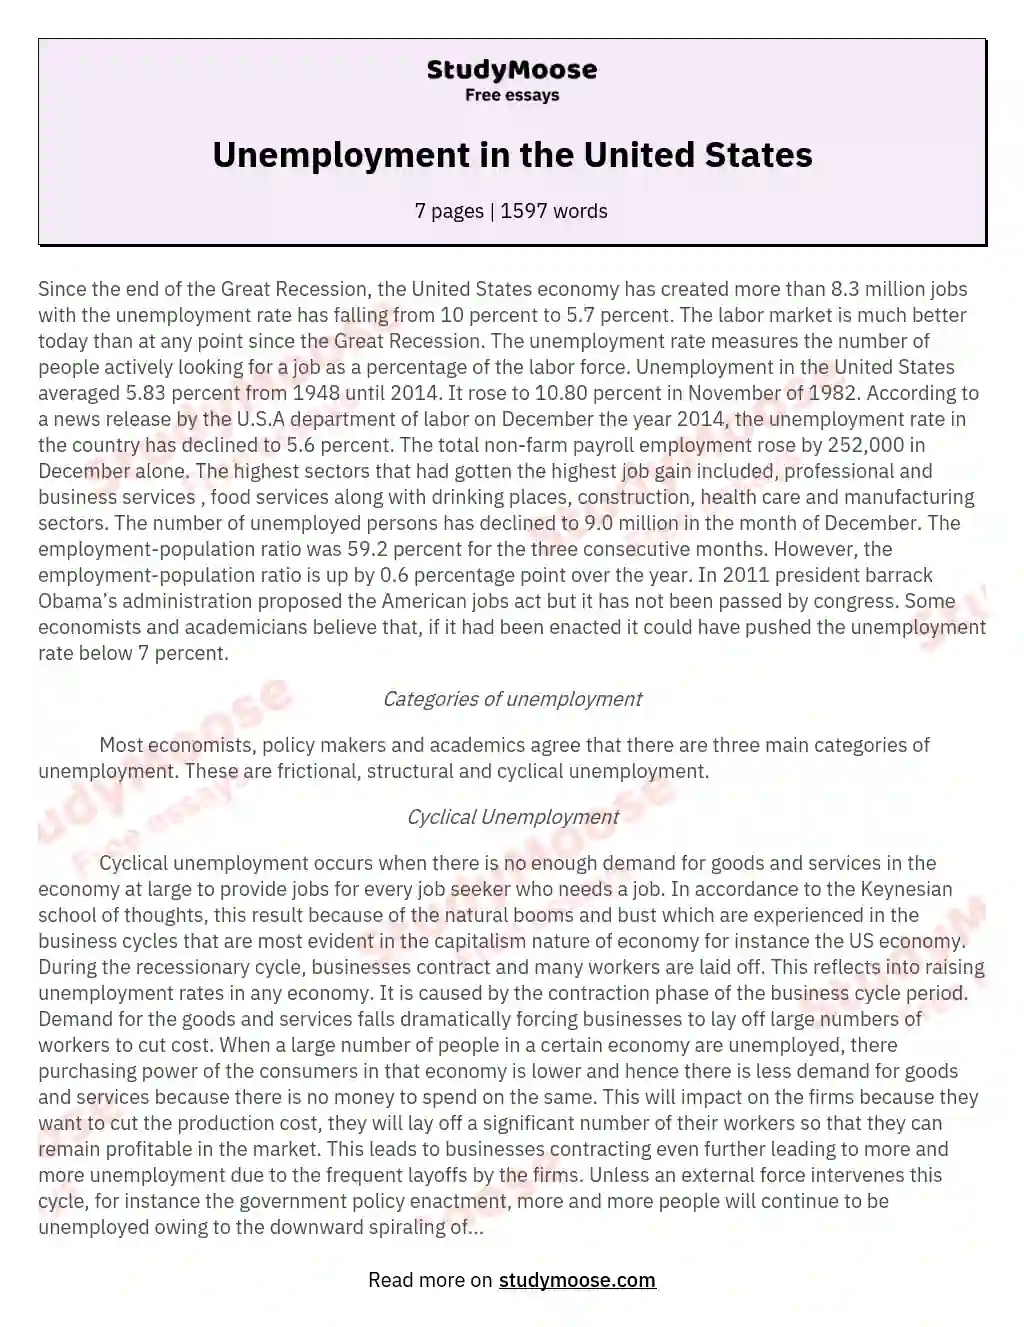 Unemployment in the United States essay